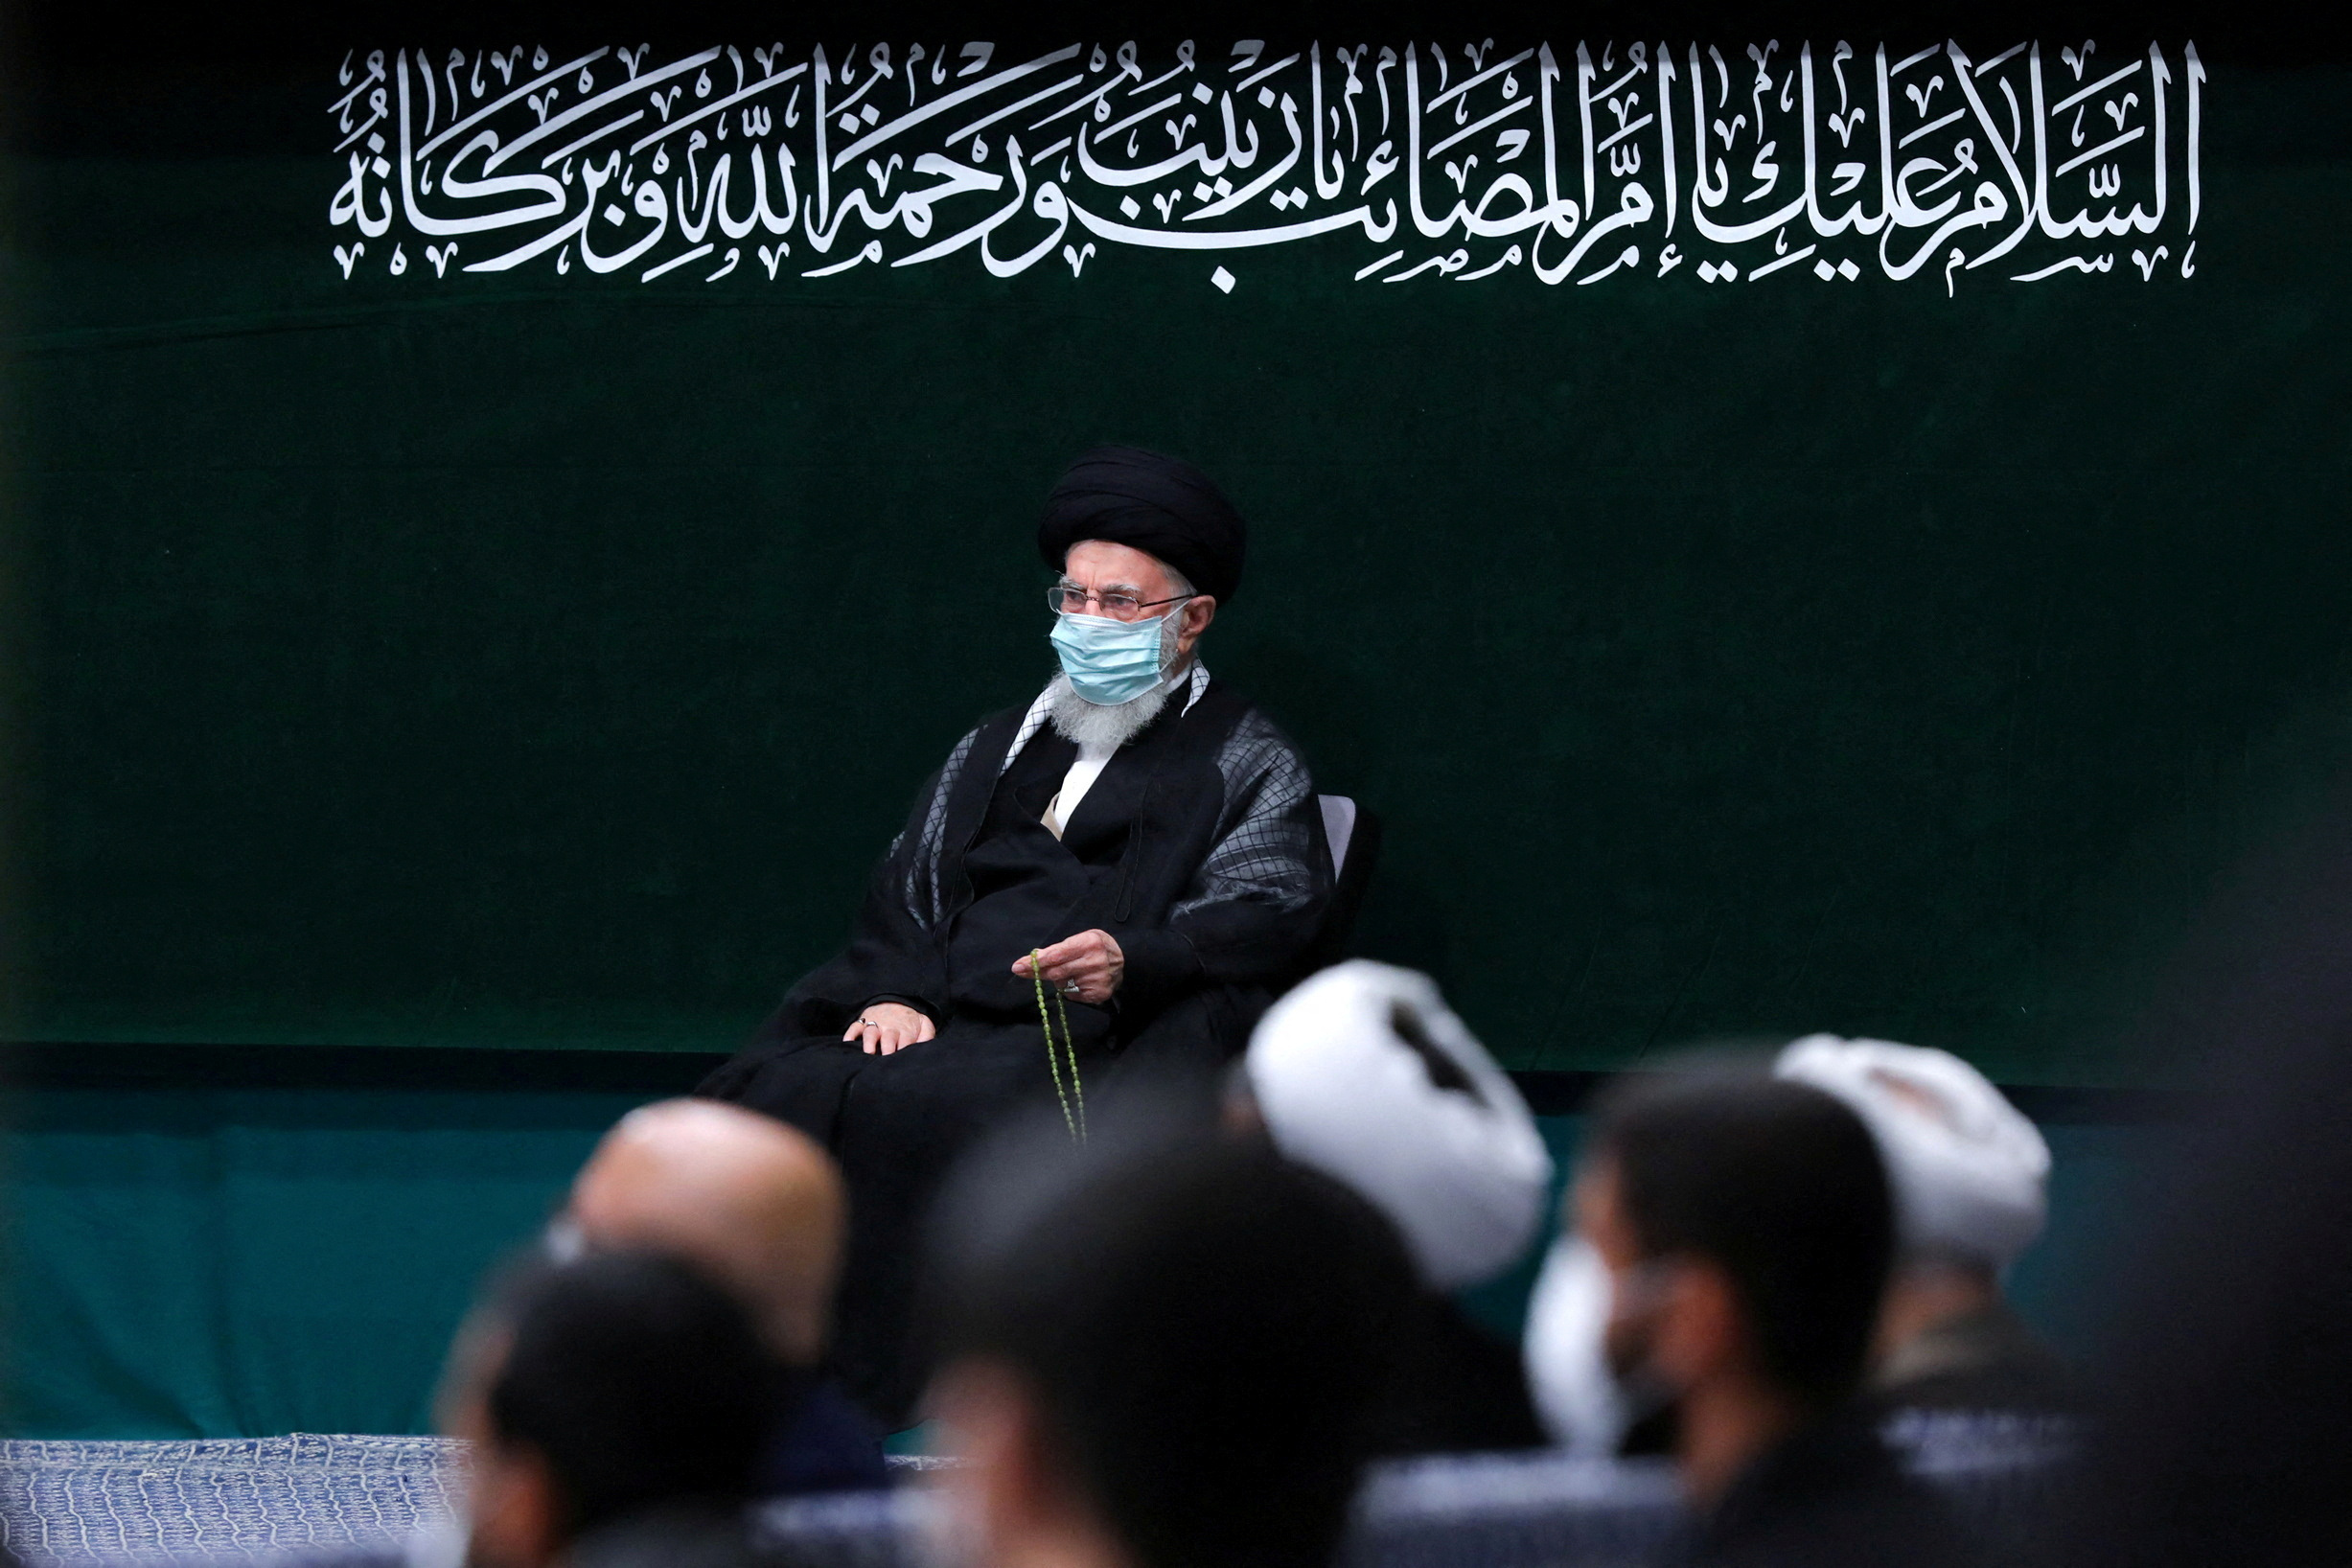 Iran's supreme leader appears at religious event, following period of ...